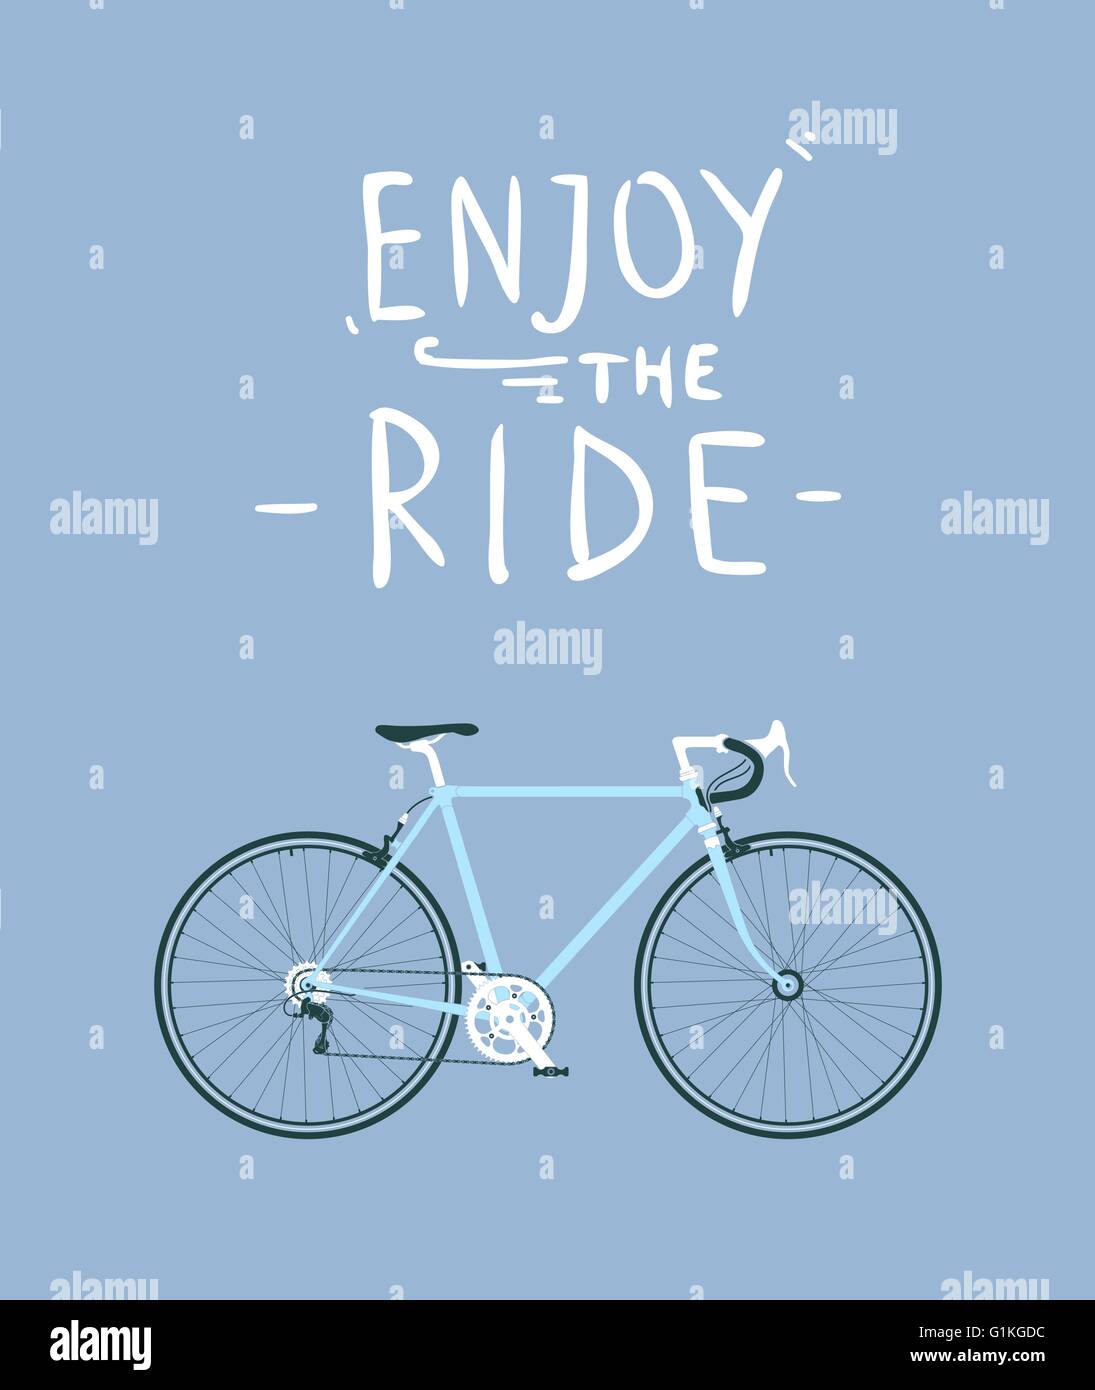 Classic mens town, road bike with enjoy the ride title, detailed vector illustration for card, t-shirt, etc Stock Vector